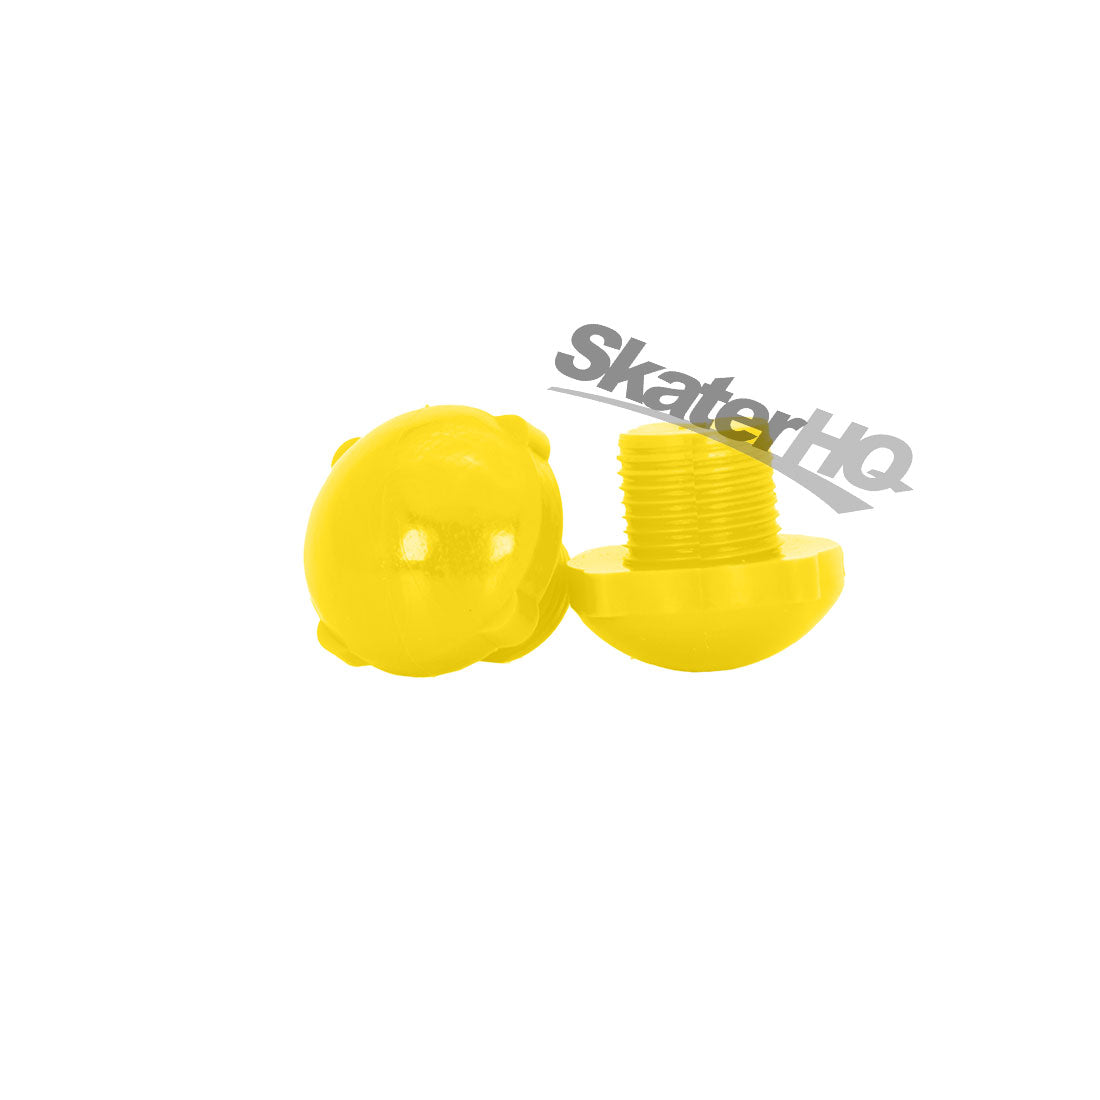 Sure-Grip Fomac Dance Plug 5/8 Pair - Yellow Roller Skate Hardware and Parts